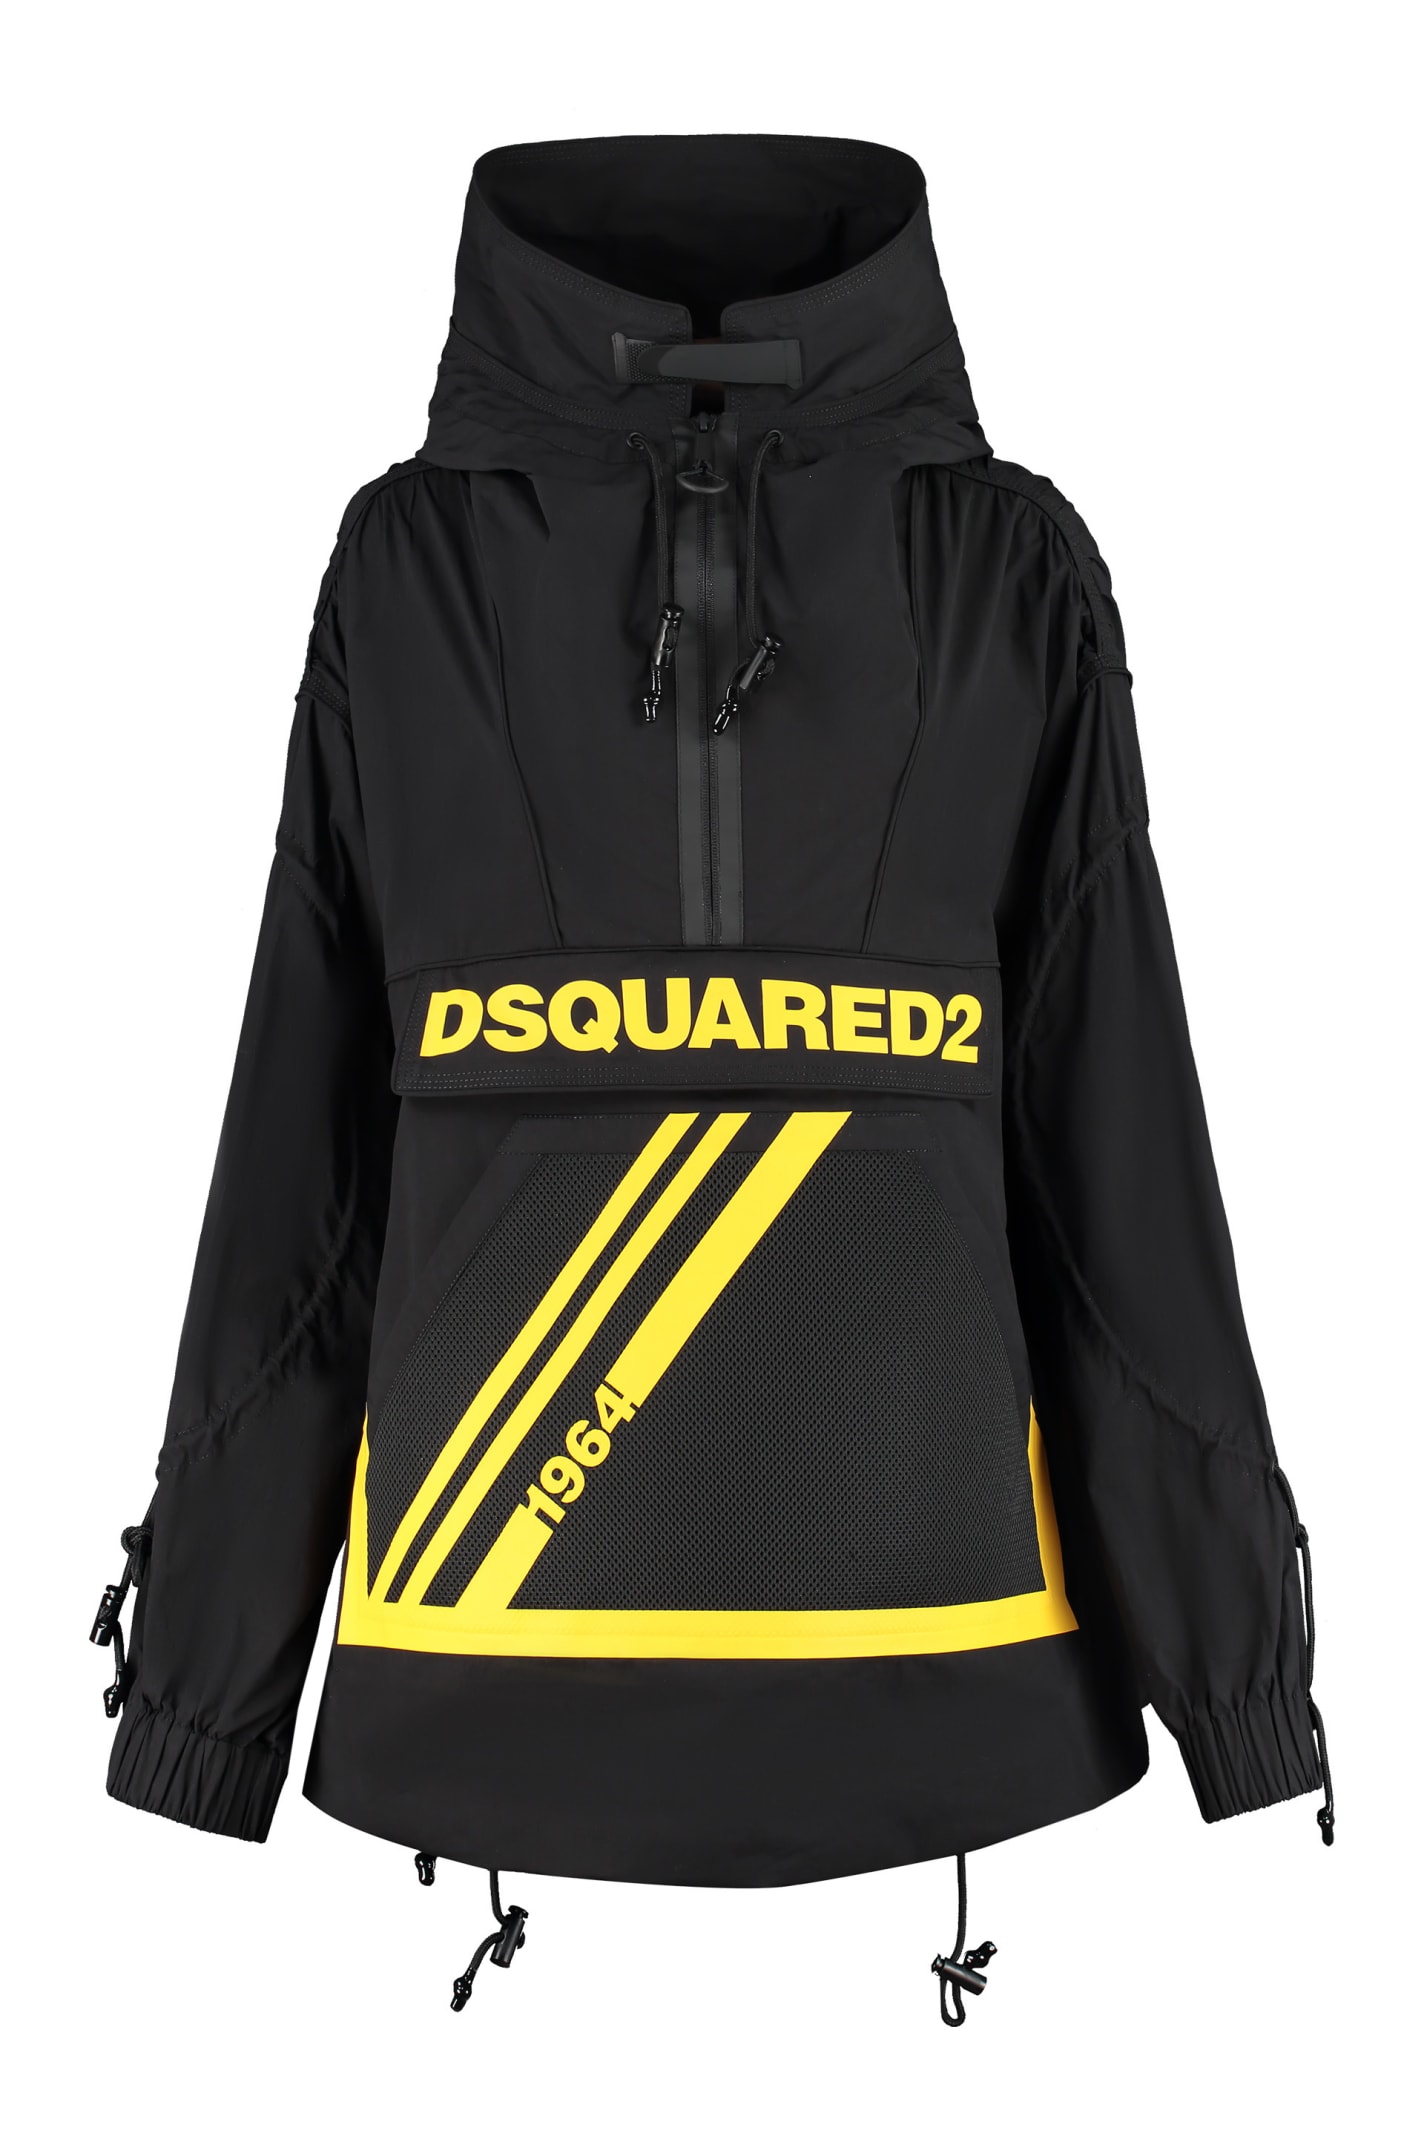 Dsquared2 Oversize Hooded Anorak